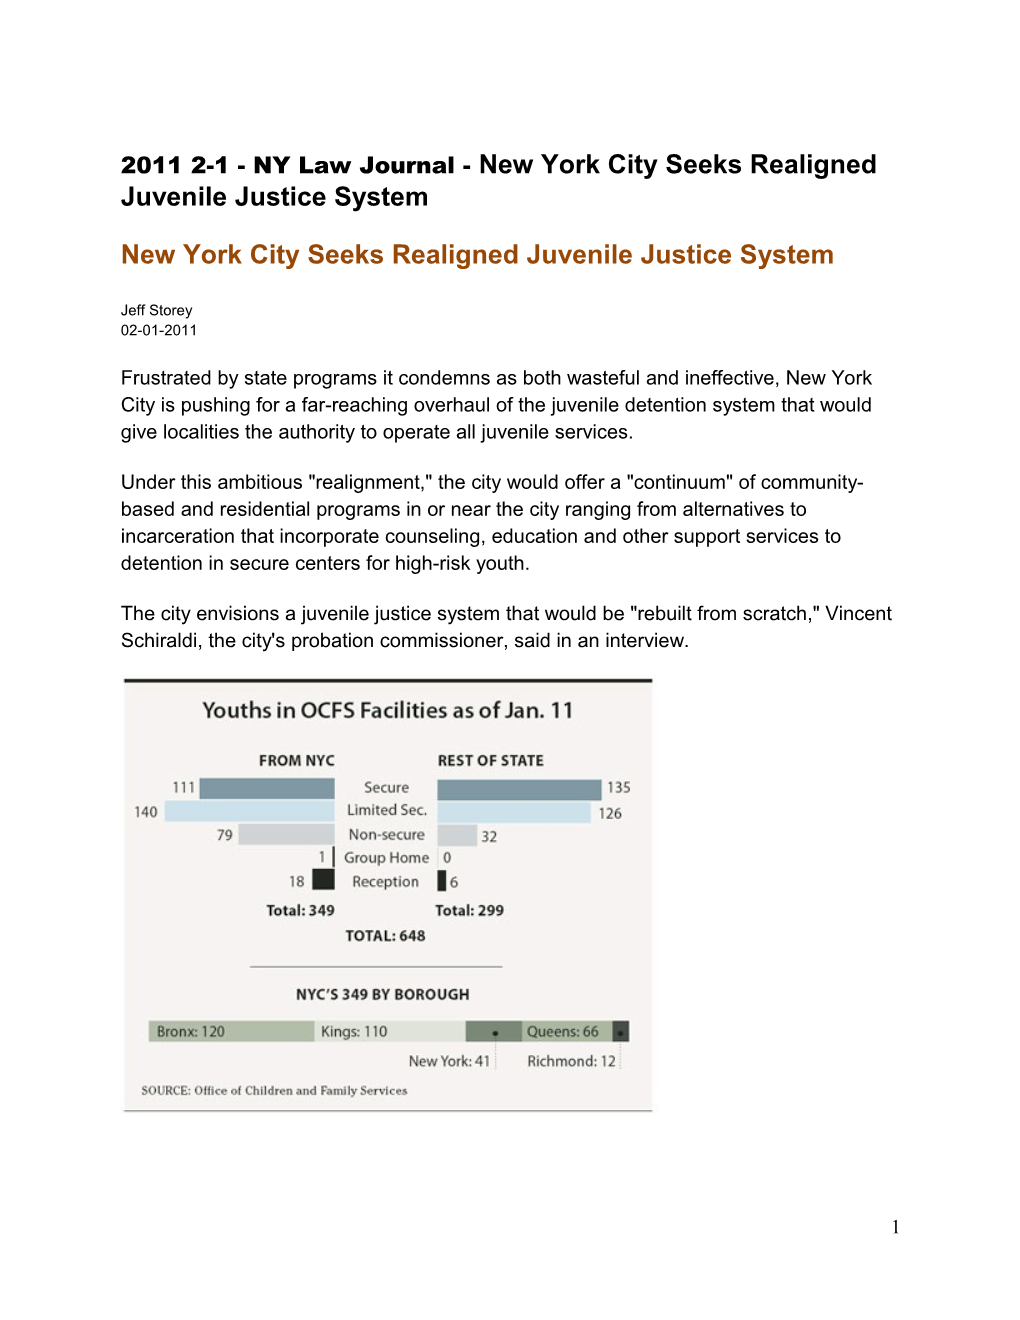 2011 2-1 - NY Law Journal - New York City Seeks Realigned Juvenile Justice System